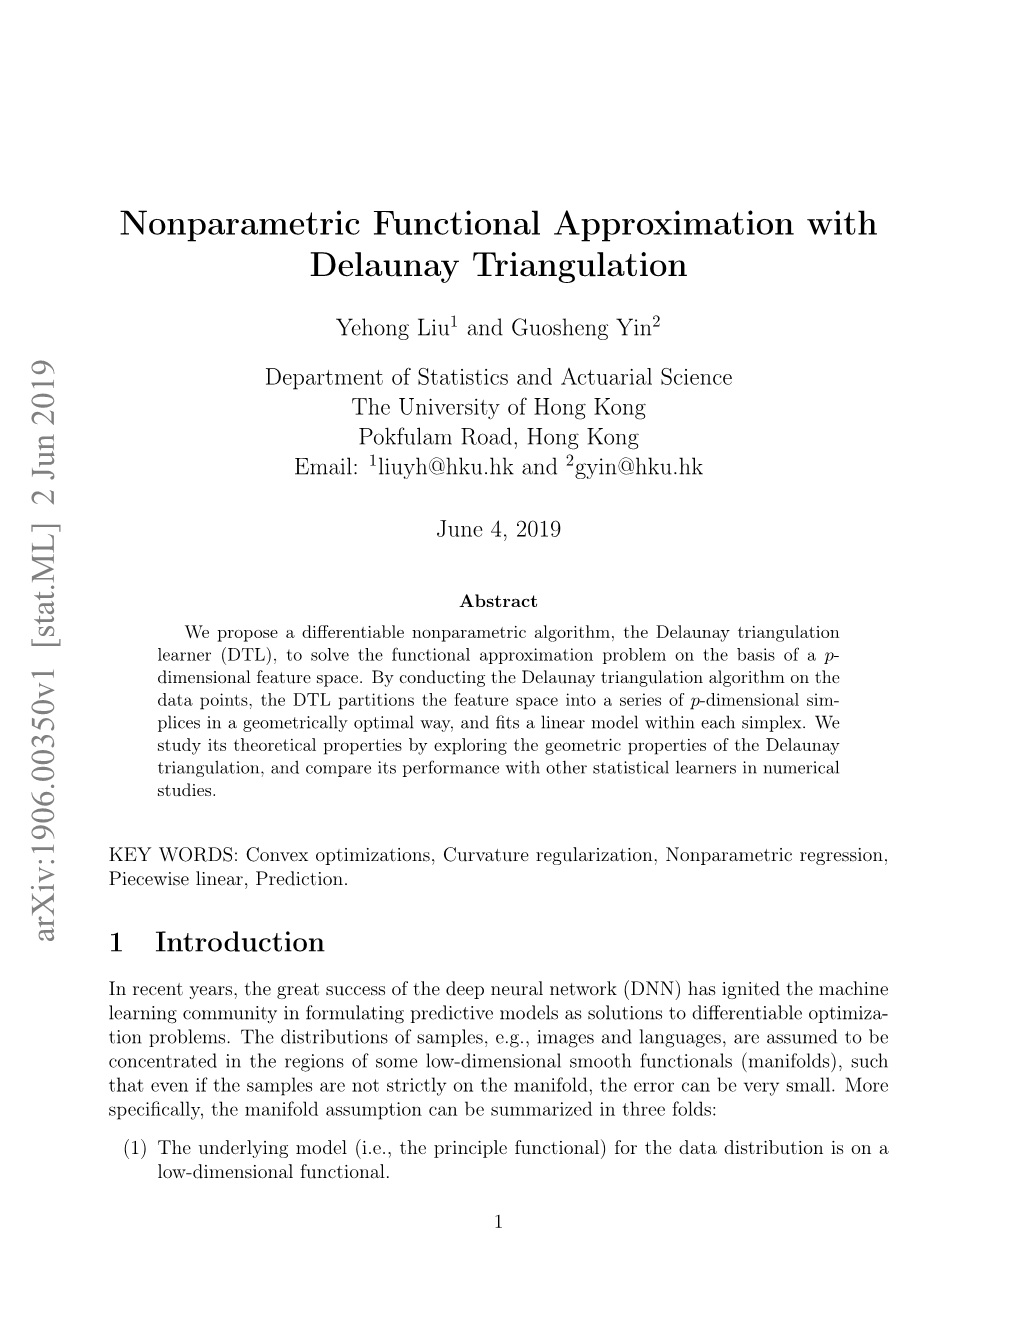 Nonparametric Functional Approximation with Delaunay Triangulation